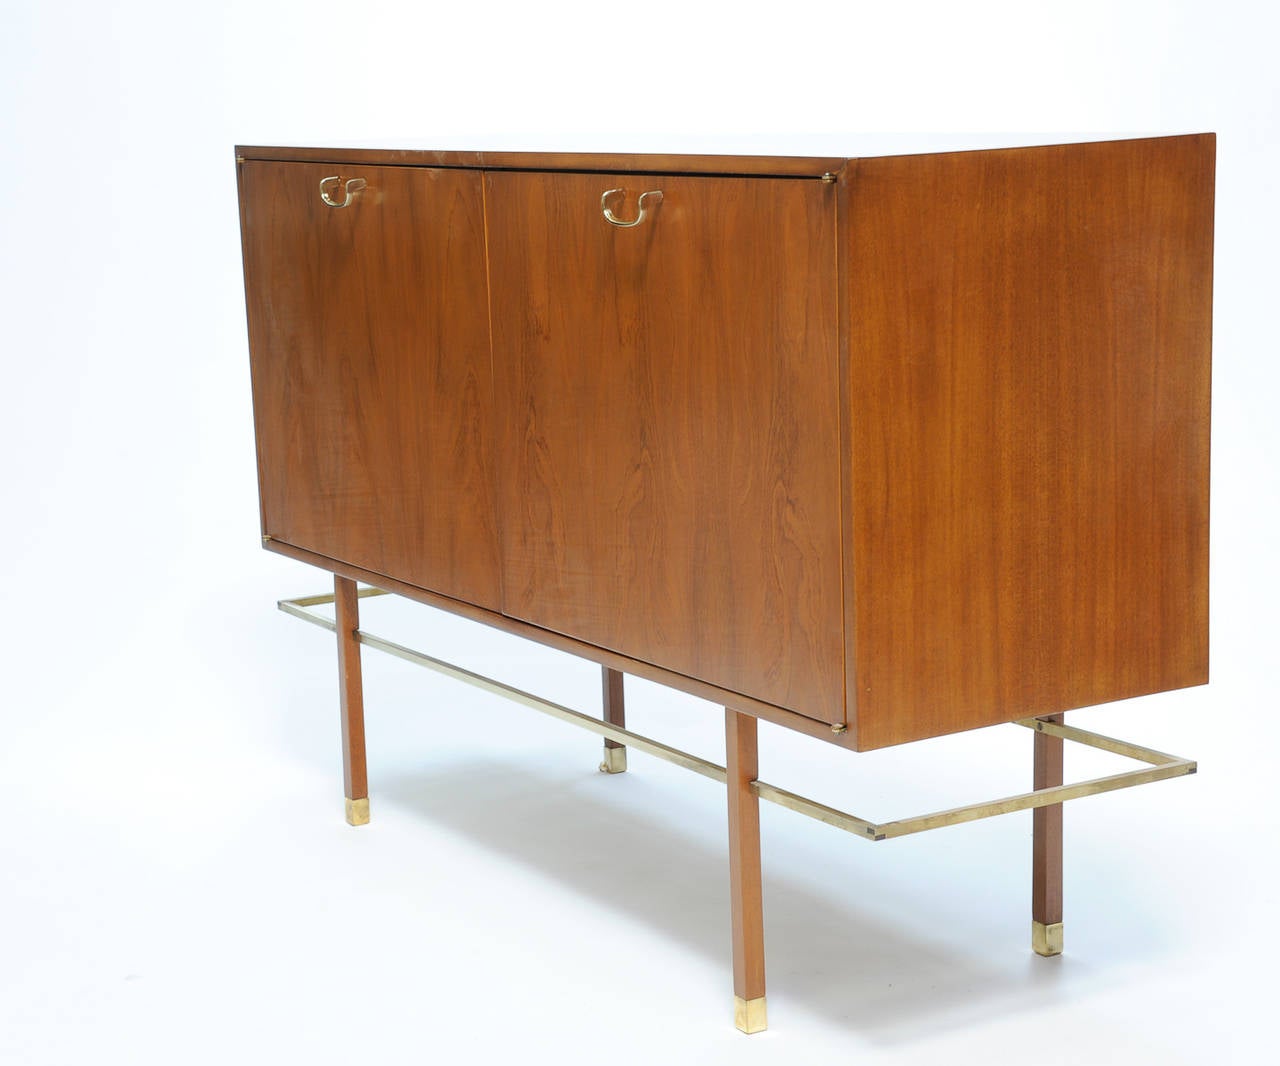 A two doors sideboard by Harvey Probber with a mahogany case and walnut doors. The sideboard features the signature Probber brass stretcher and feet.
Inside the cabinet is divided in four equal openings.

A handsome piece by a American modern